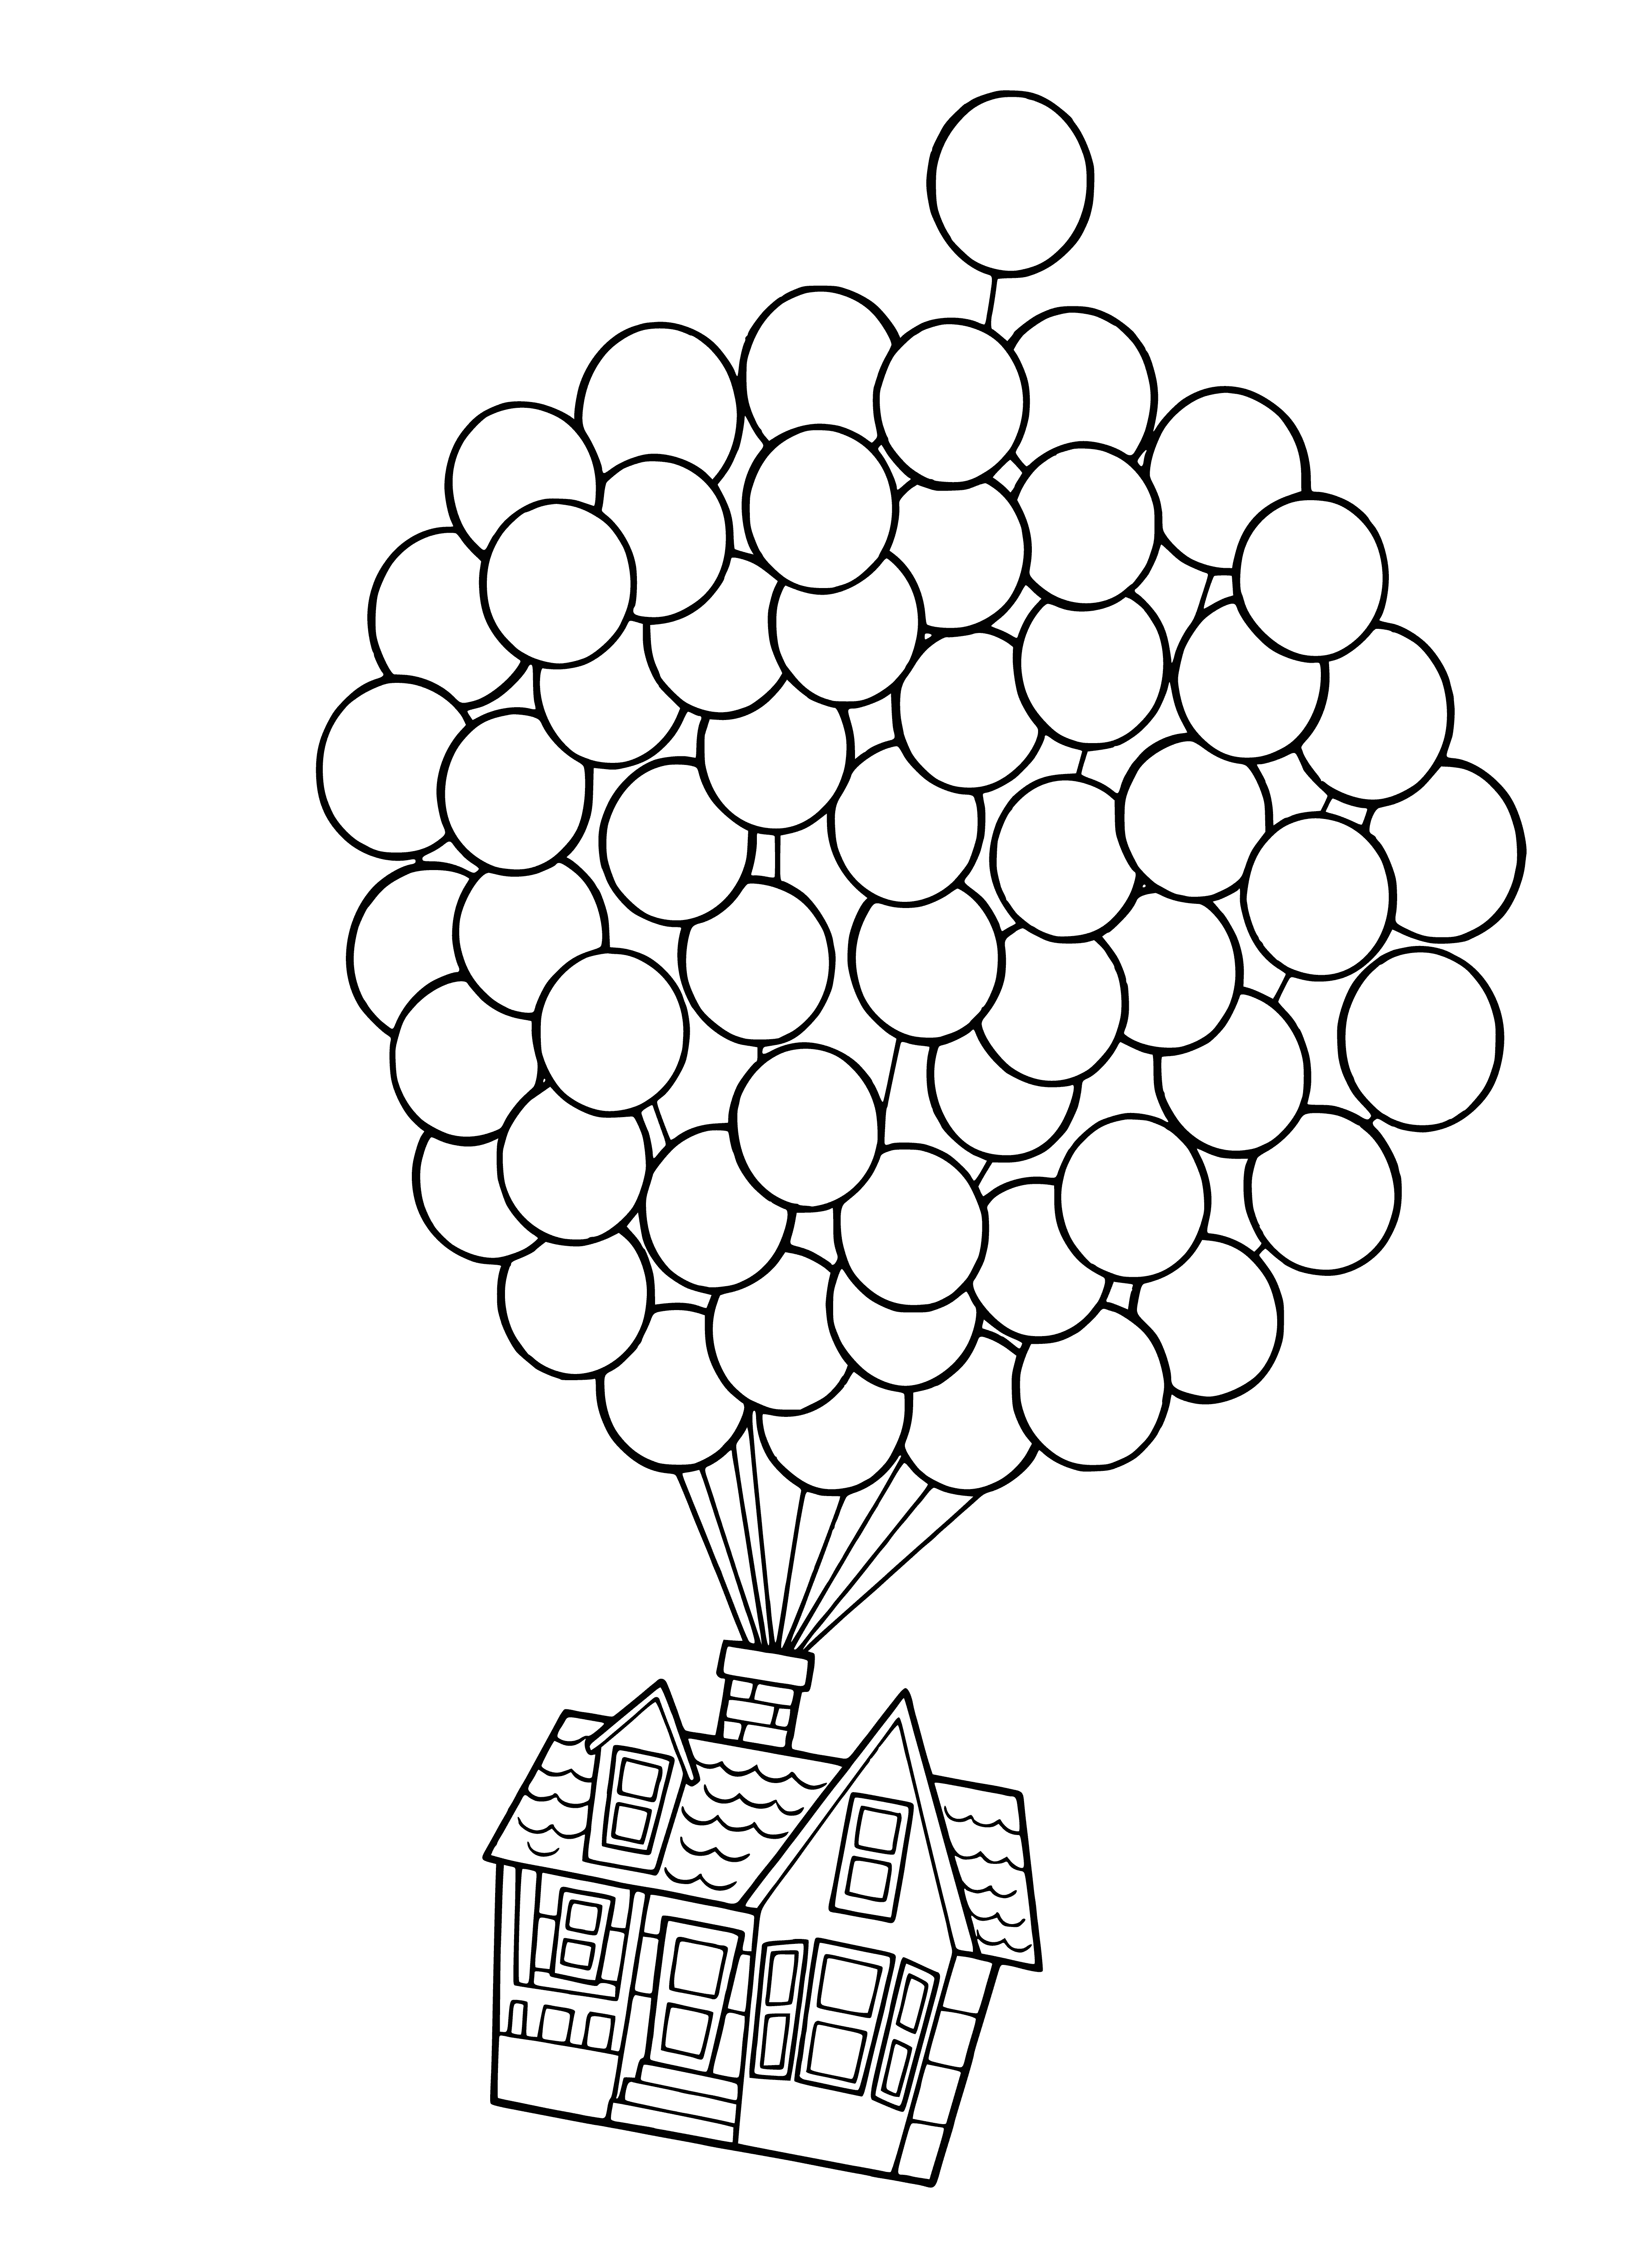 coloring page: A house flies high in the sky, attached to balloons. #Avatar